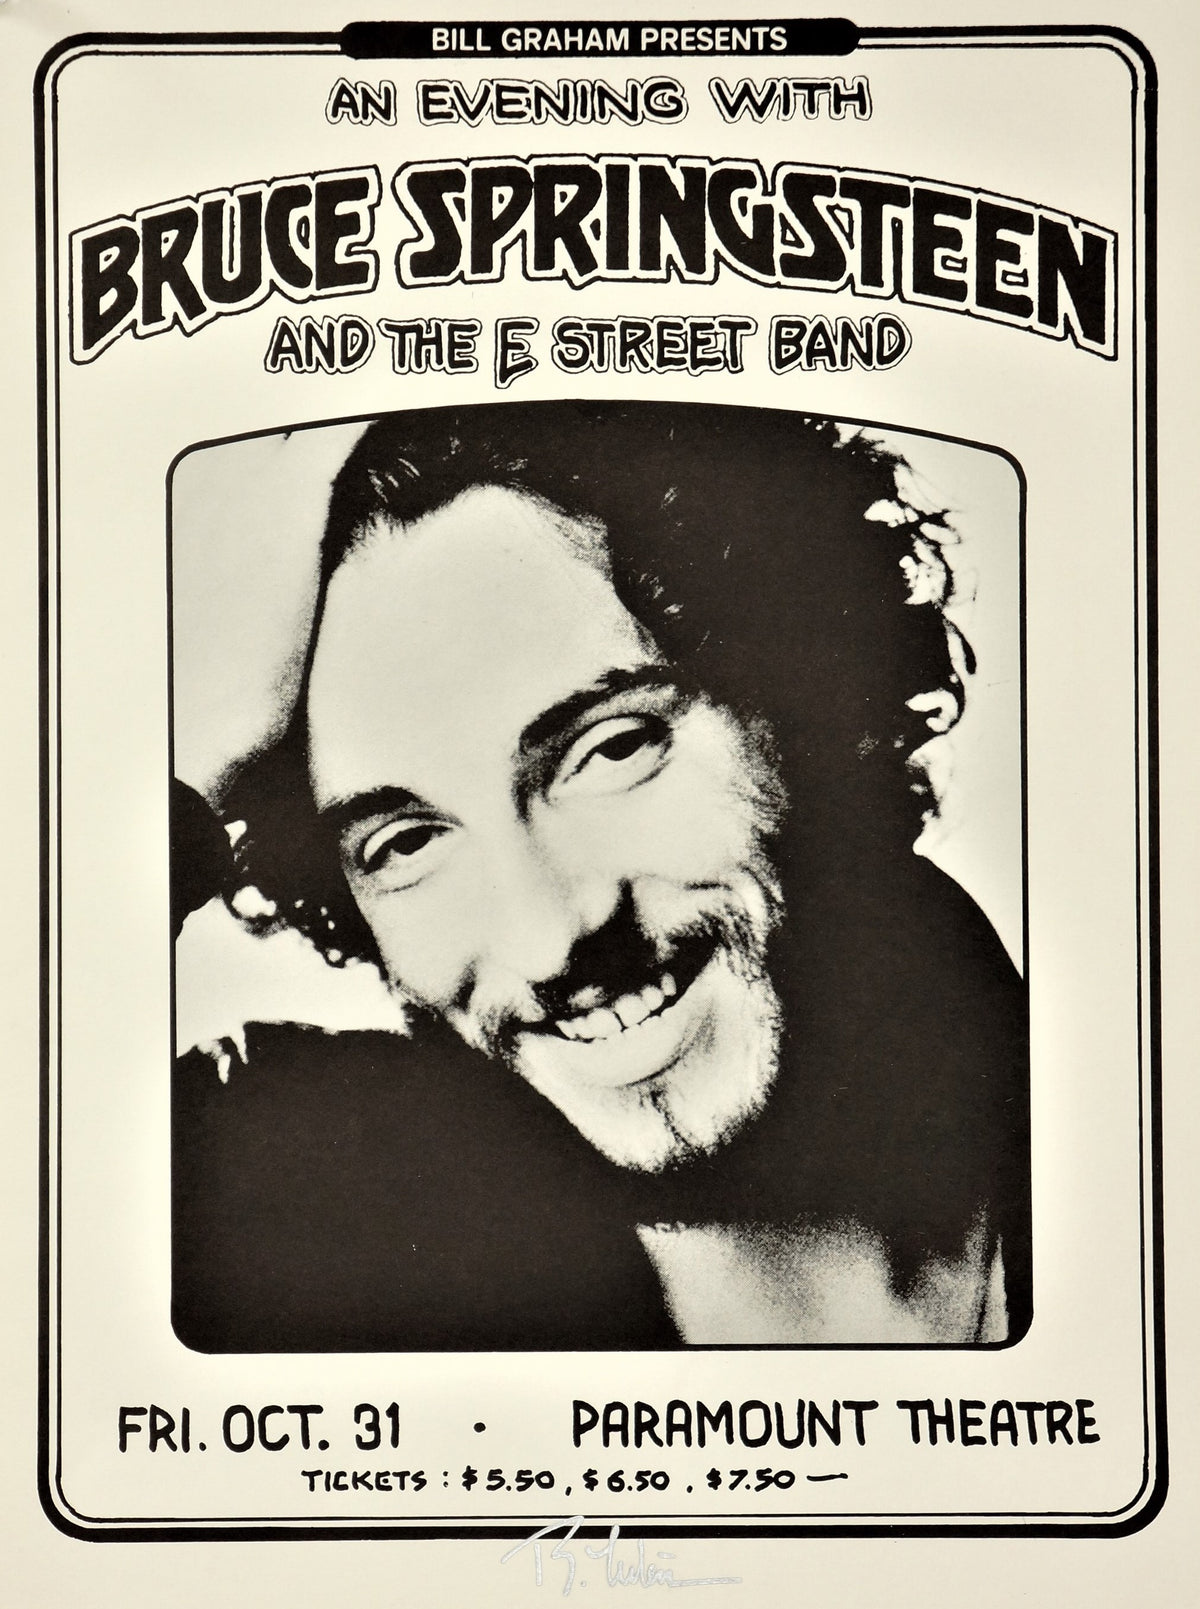 Bruce Springsteen at the Paramount Theatre - Authentic Vintage Poster